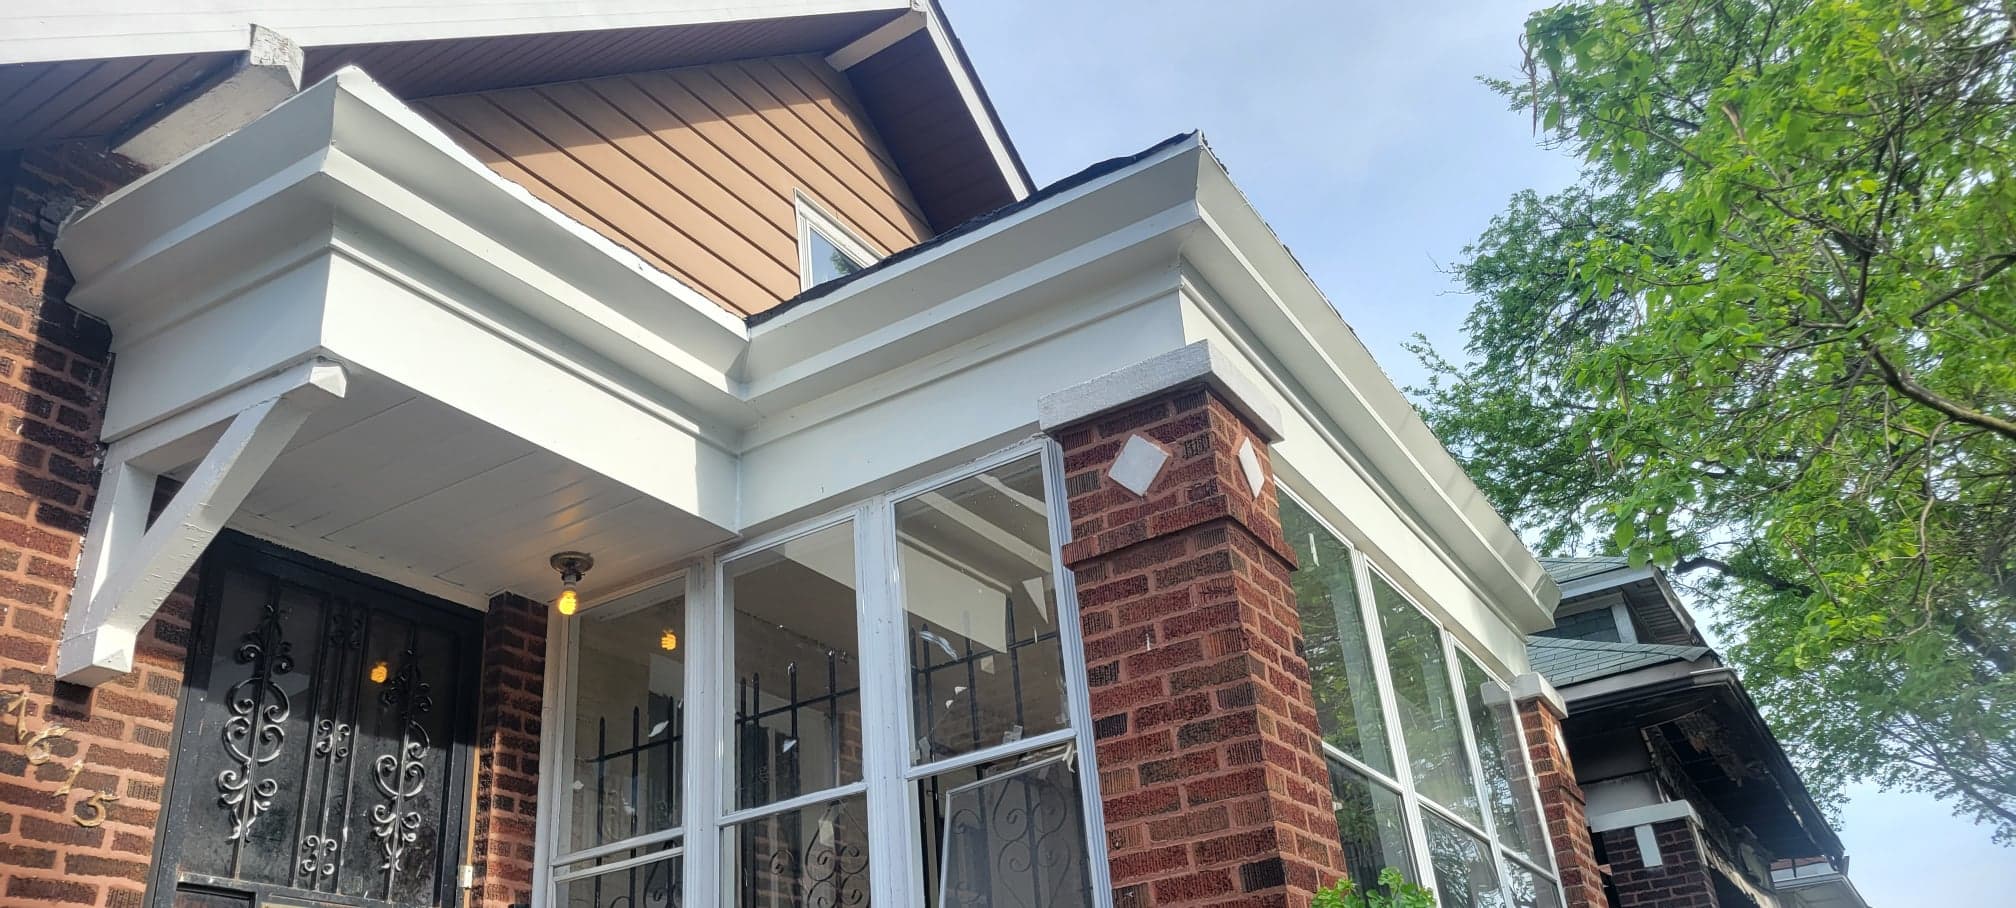 Soffit Repair near me Chicago Illinois. repair installation of eavessoffit and fasciachicago and surrounding areas